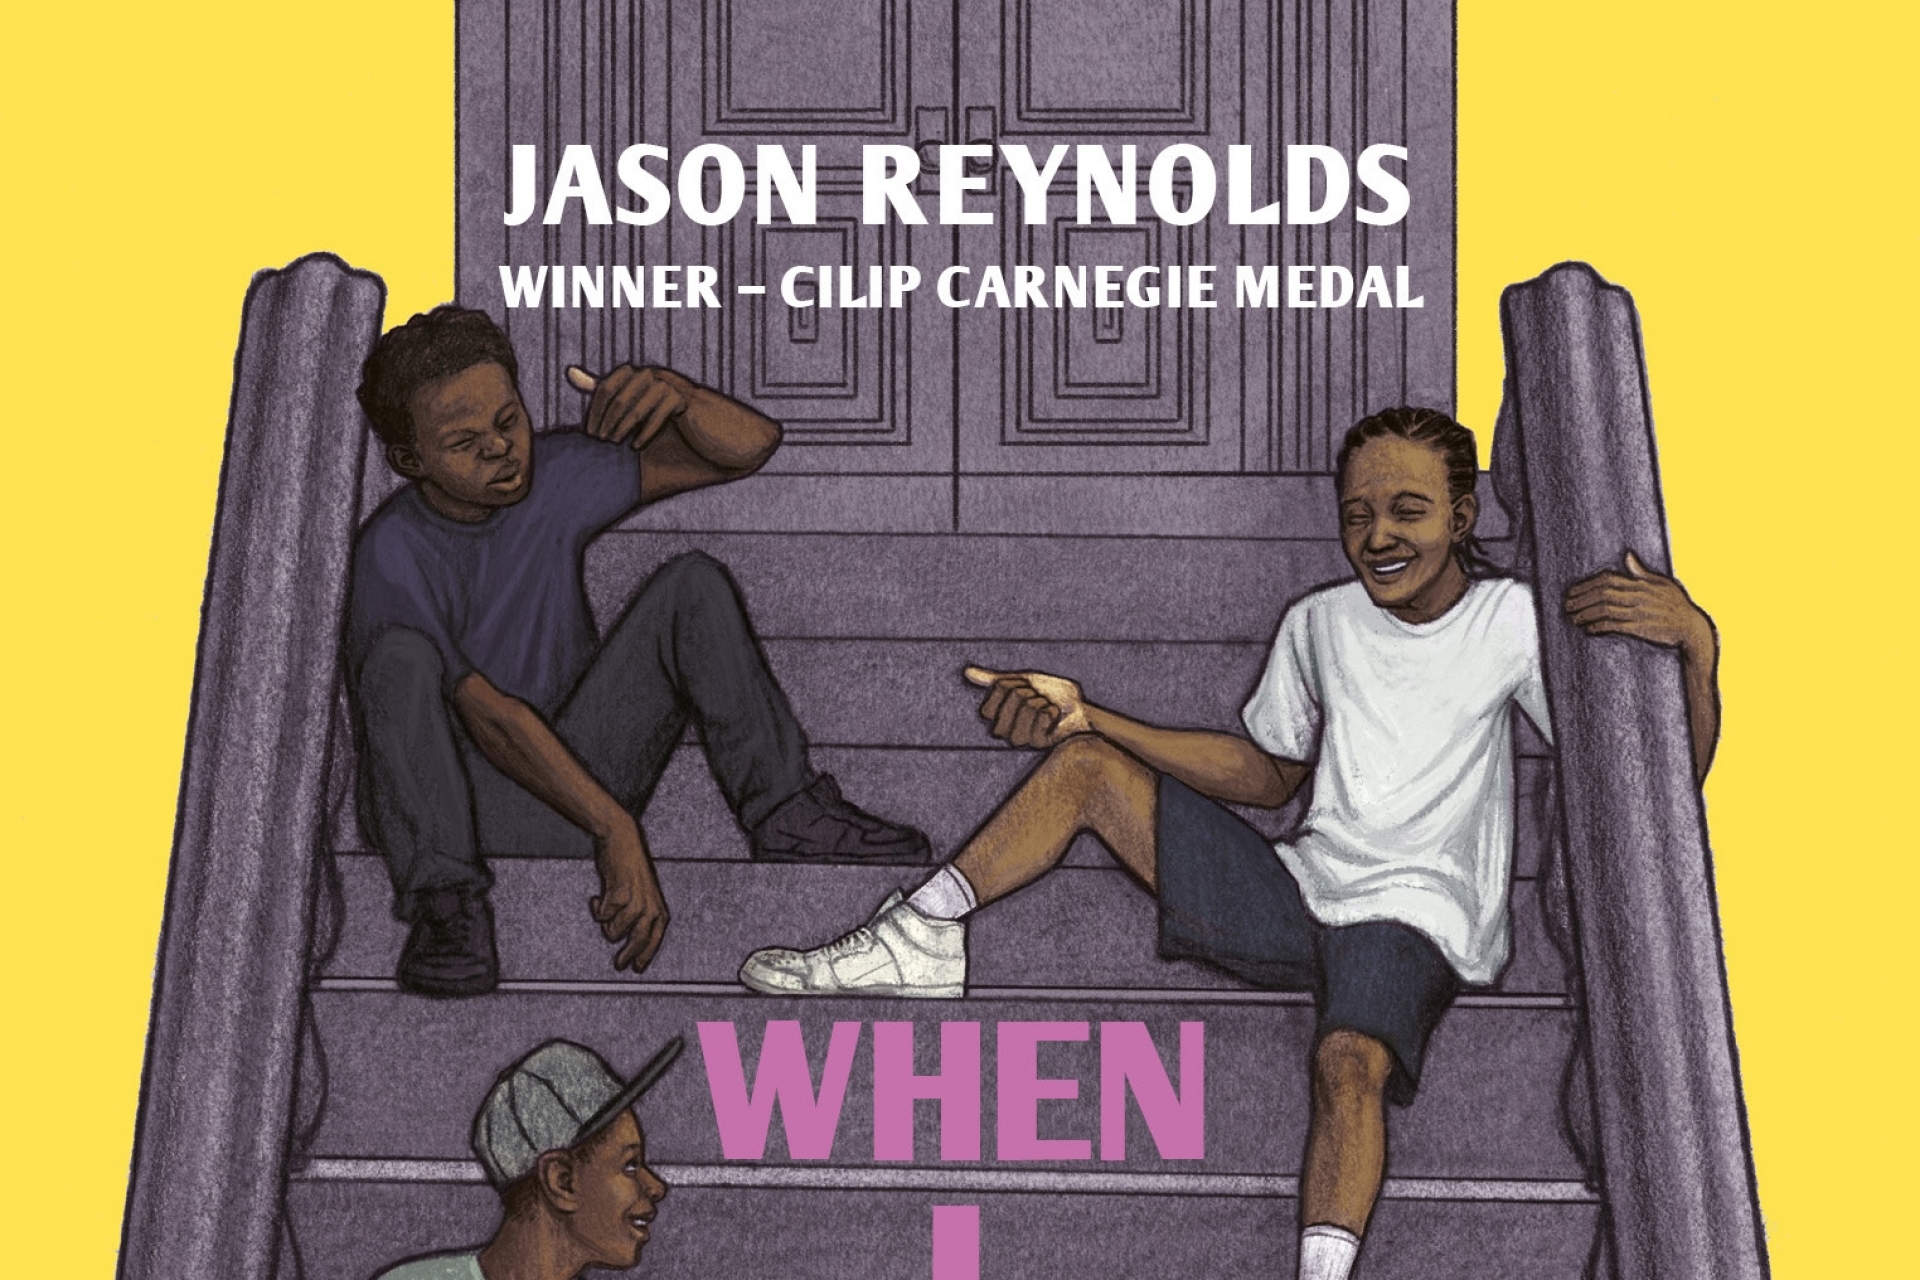 Jason Reynolds - our Author of the Month